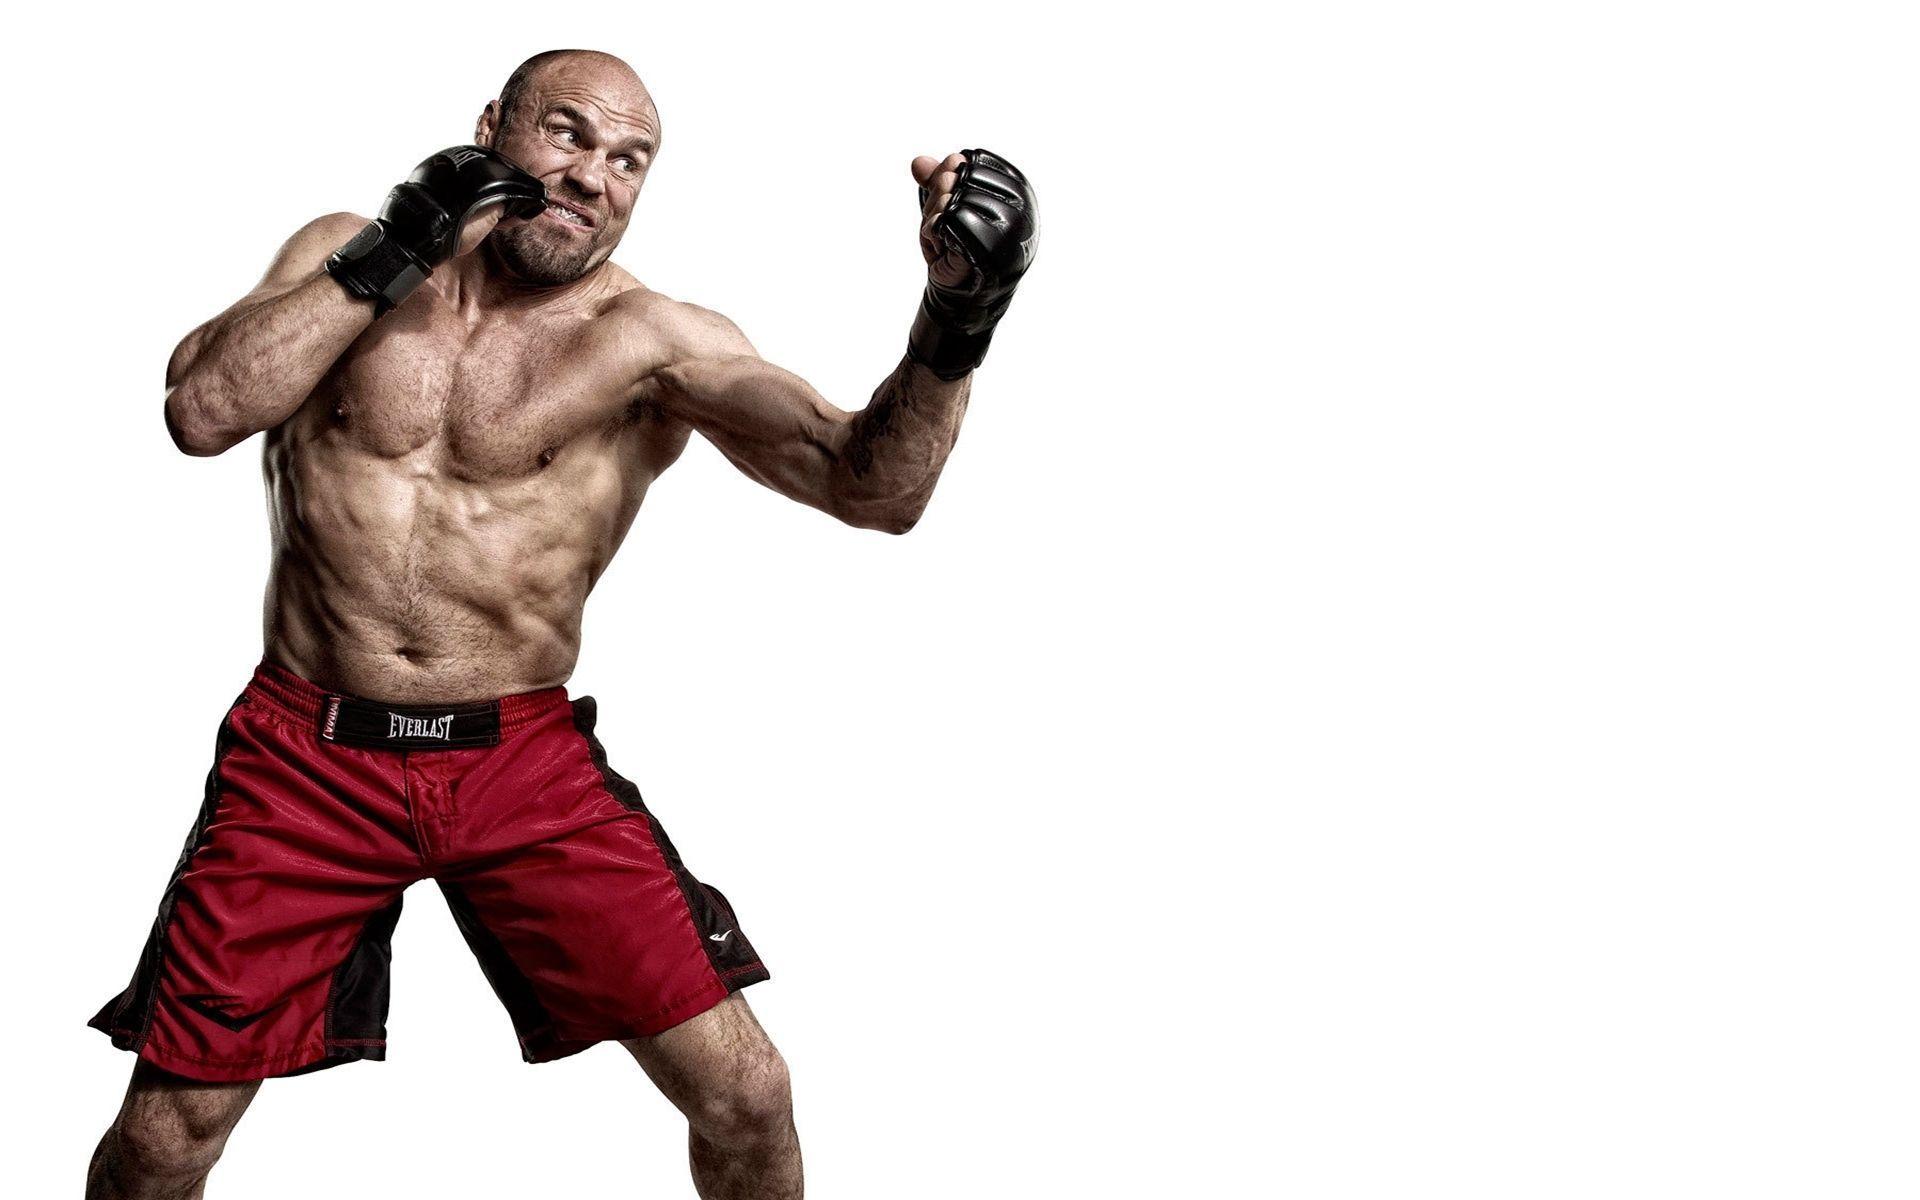 Randy Couture Ufc (1920×1200)